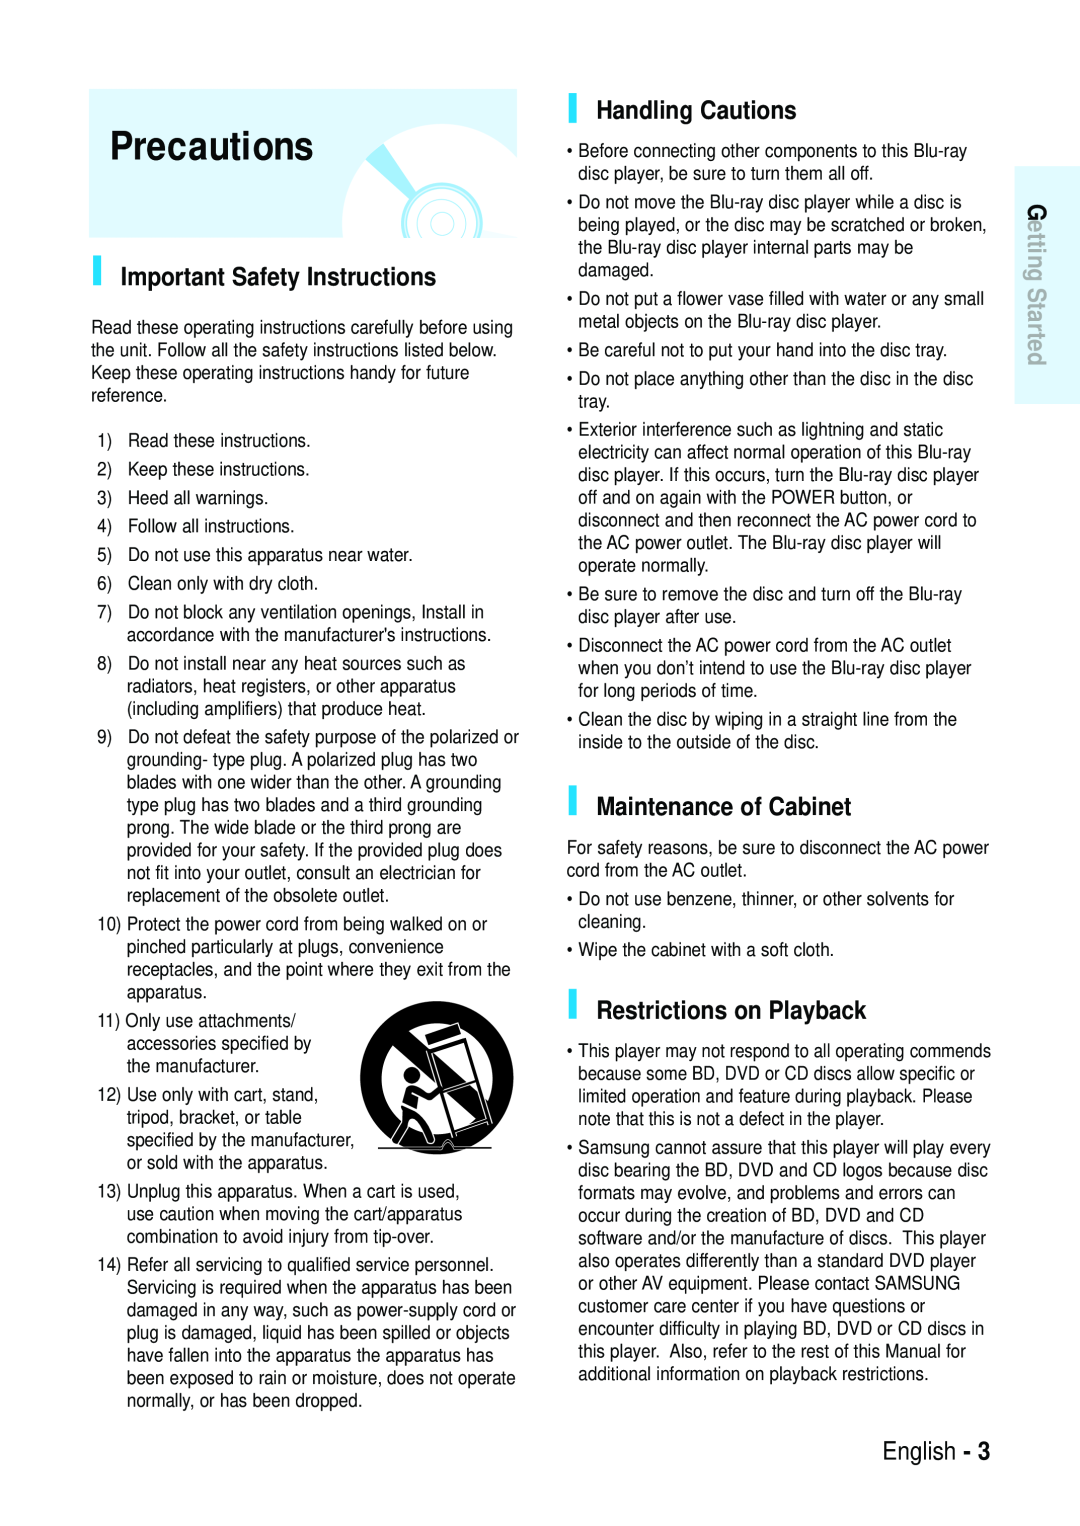 Samsung Blu-ray Disc manual Precautions, Important Safety Instructions, Handling Cautions, Maintenance of Cabinet, English 